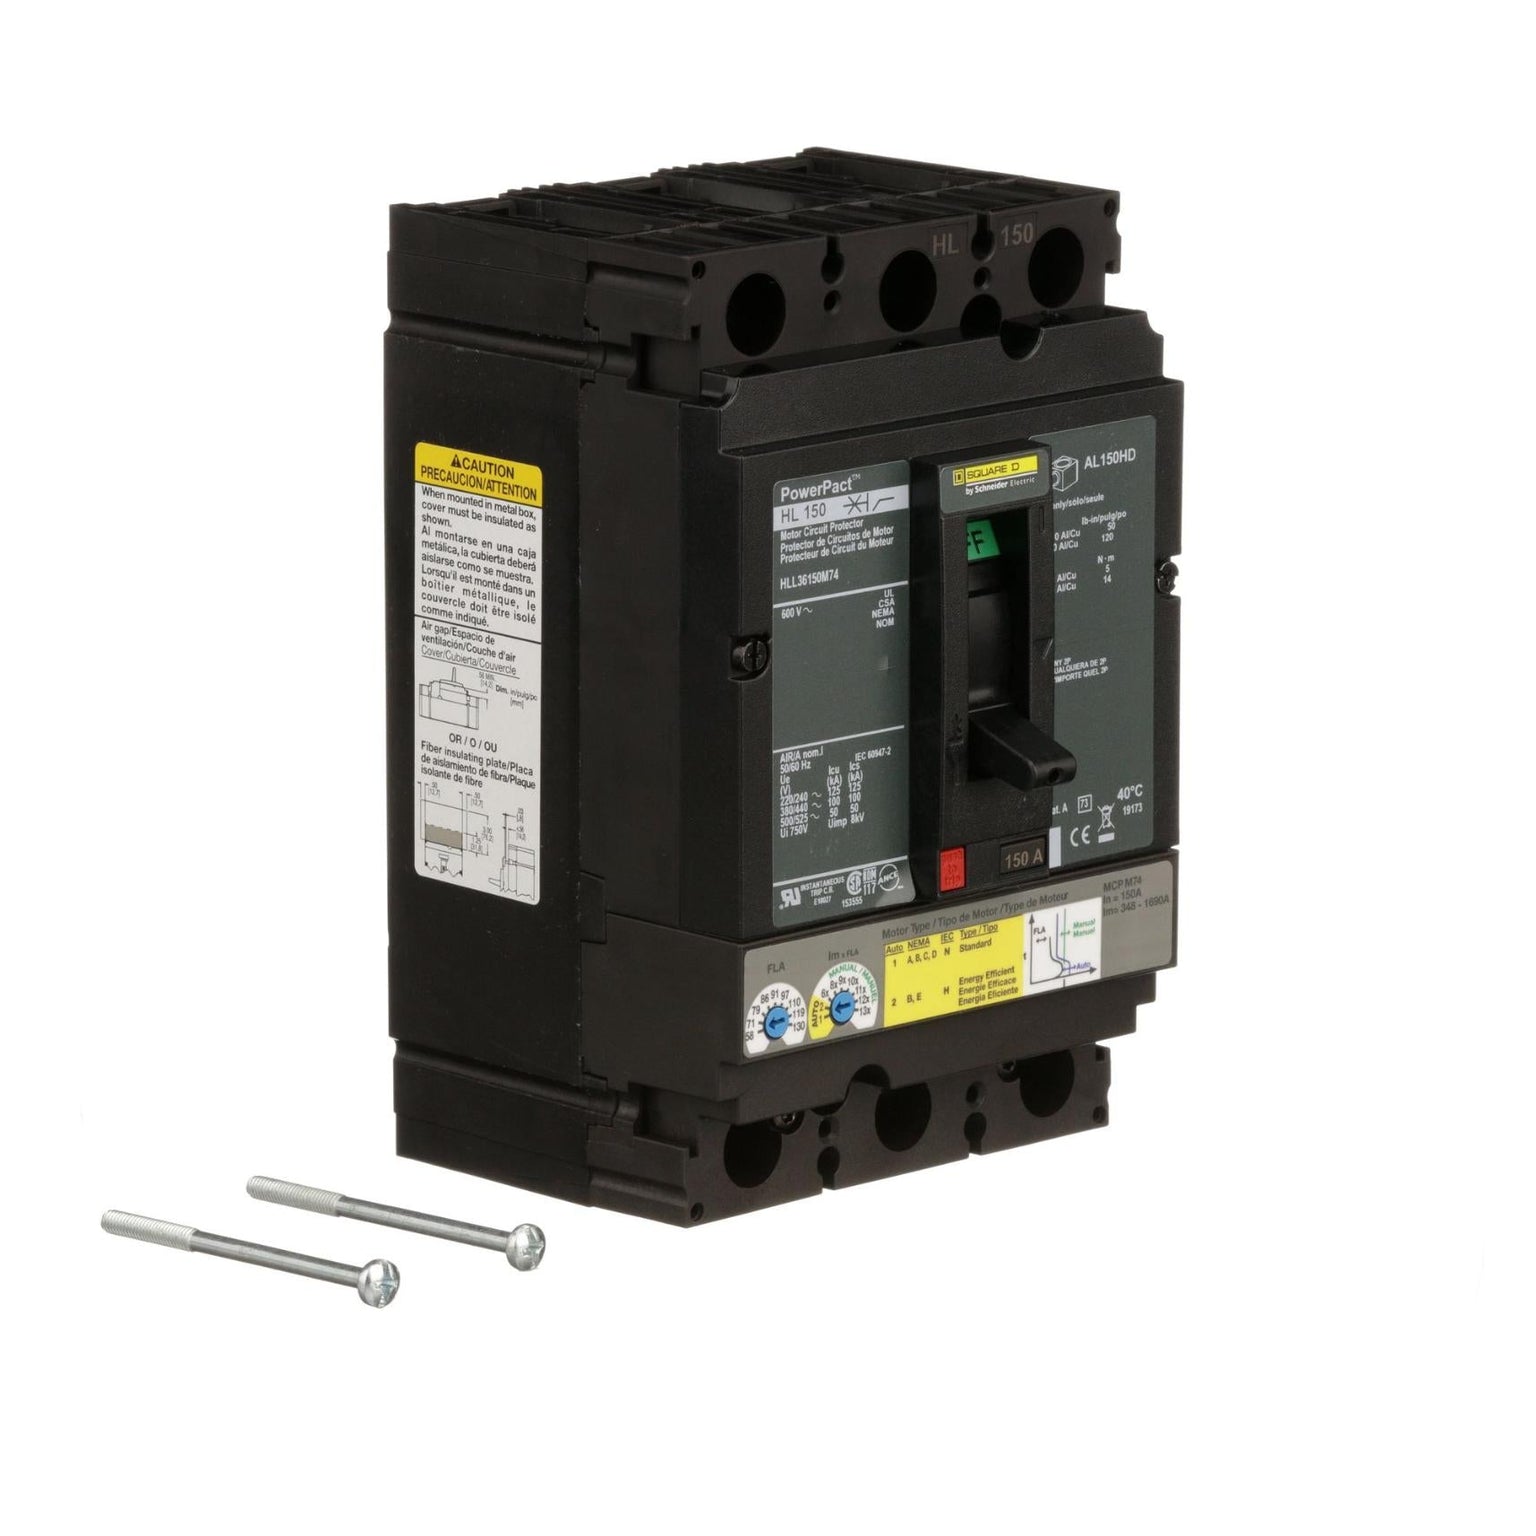 HLL36150M74 - Square D - Molded Case Circuit Breakers